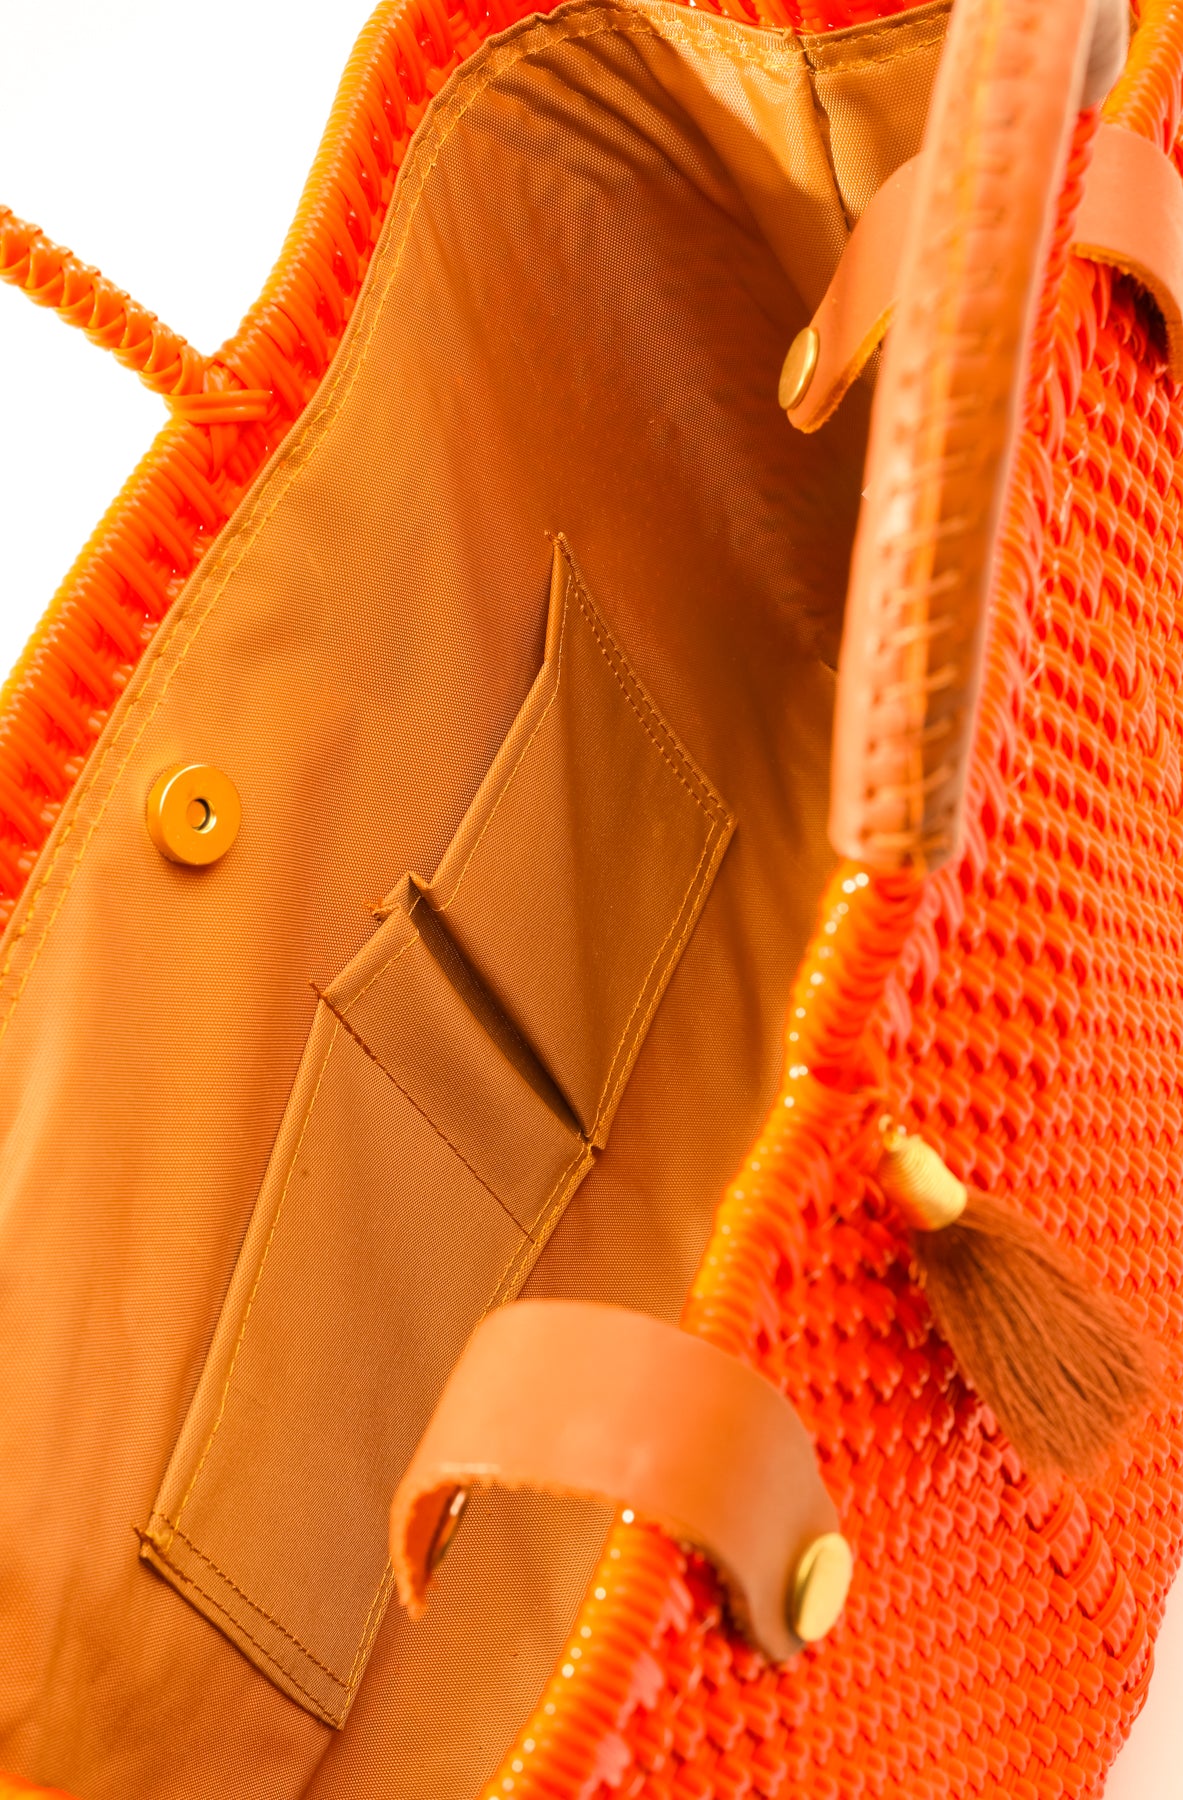 Inside tan lining, pockets, and magnetic closure of orange woven handbag with tan leather handle, closure straps, and tassel